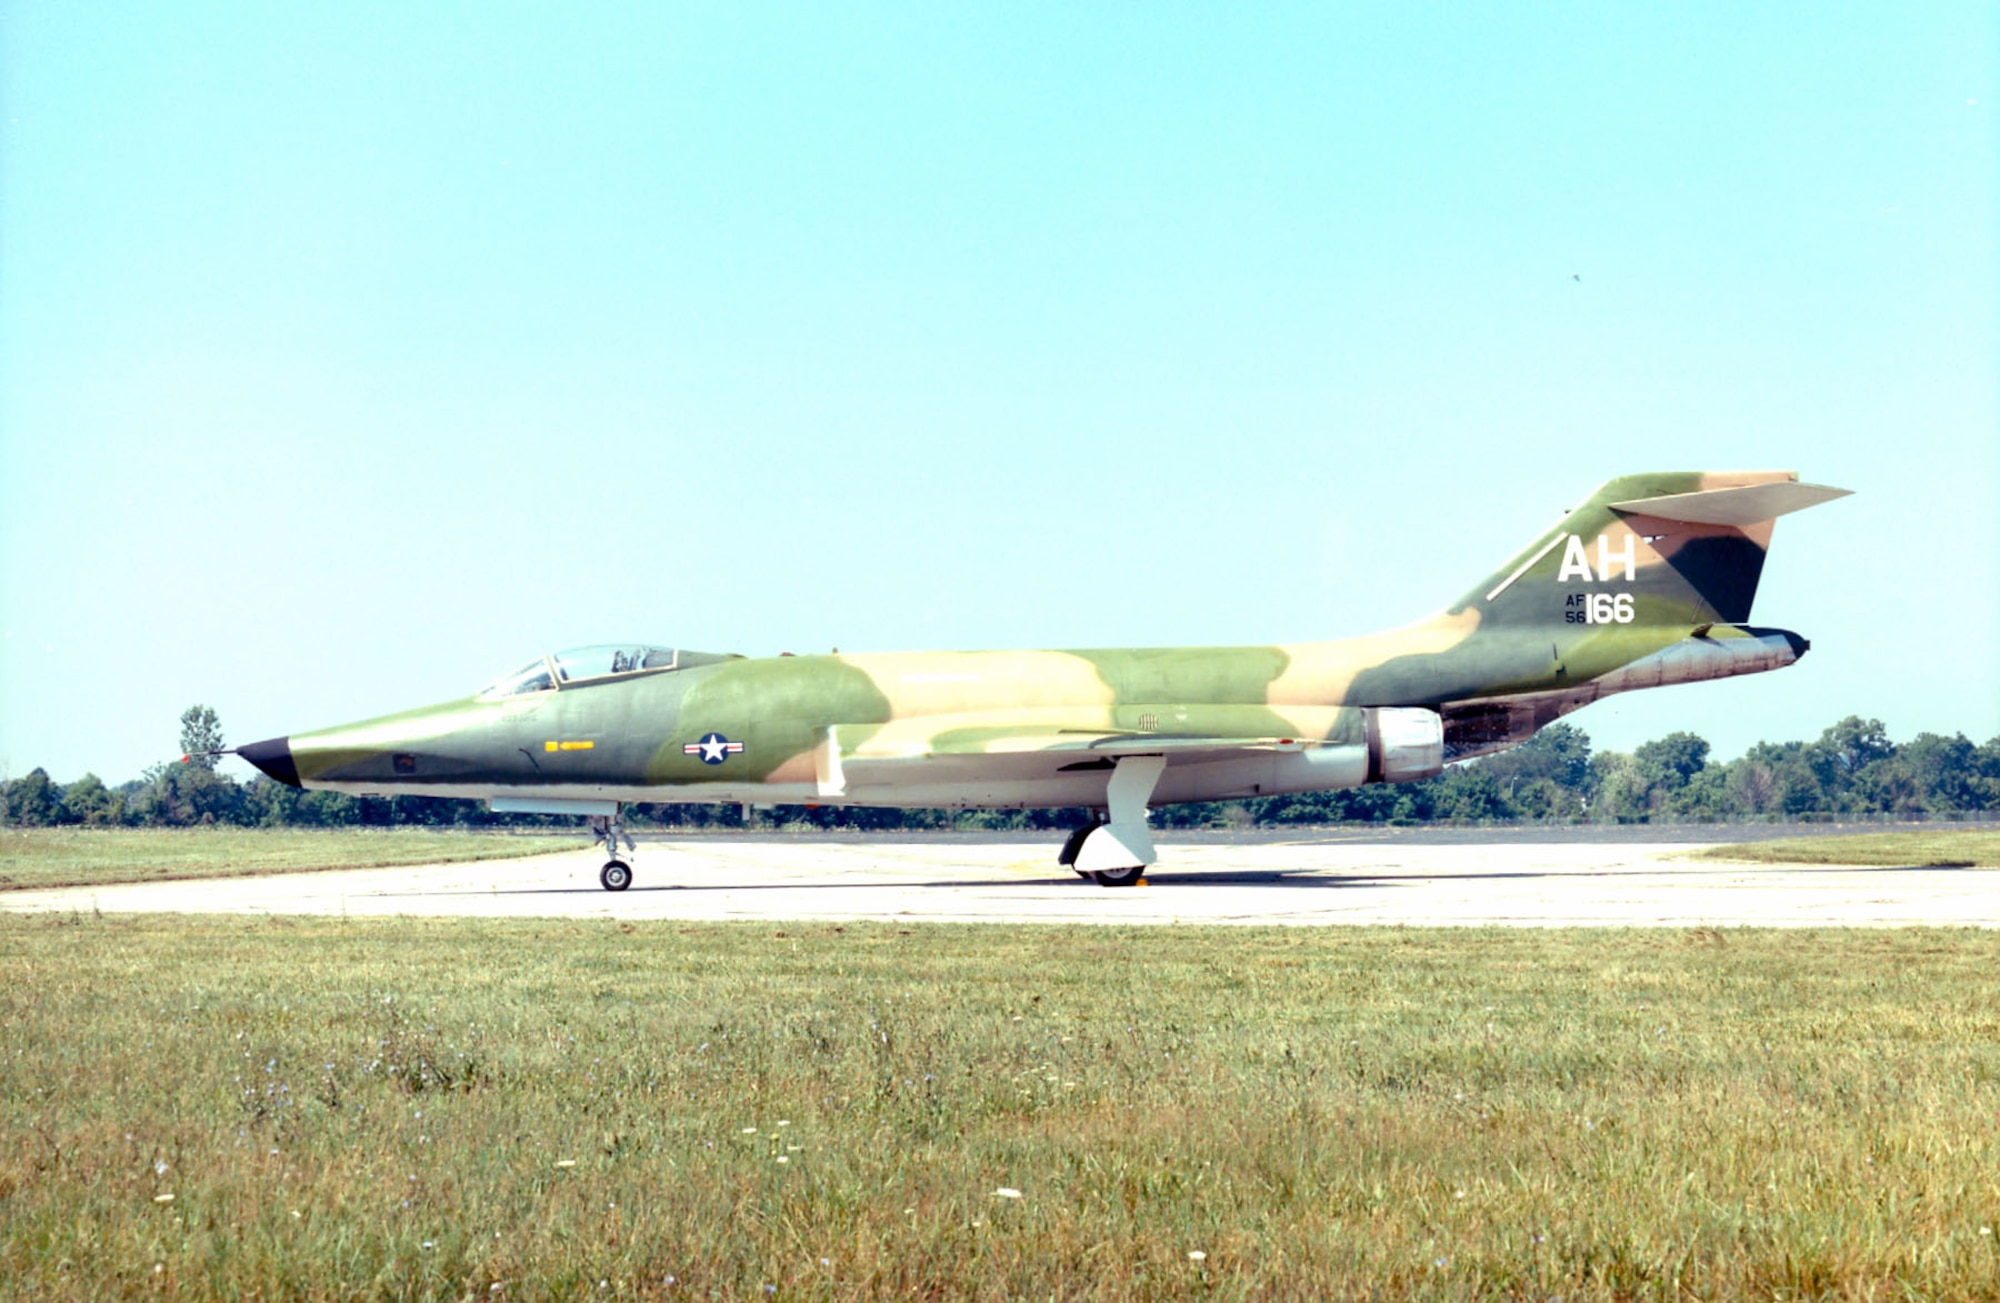 DAYTON, Ohio -- McDonnell RF-101C Voodoo at the National Museum of the United States Air Force. (U.S. Air Force photo)